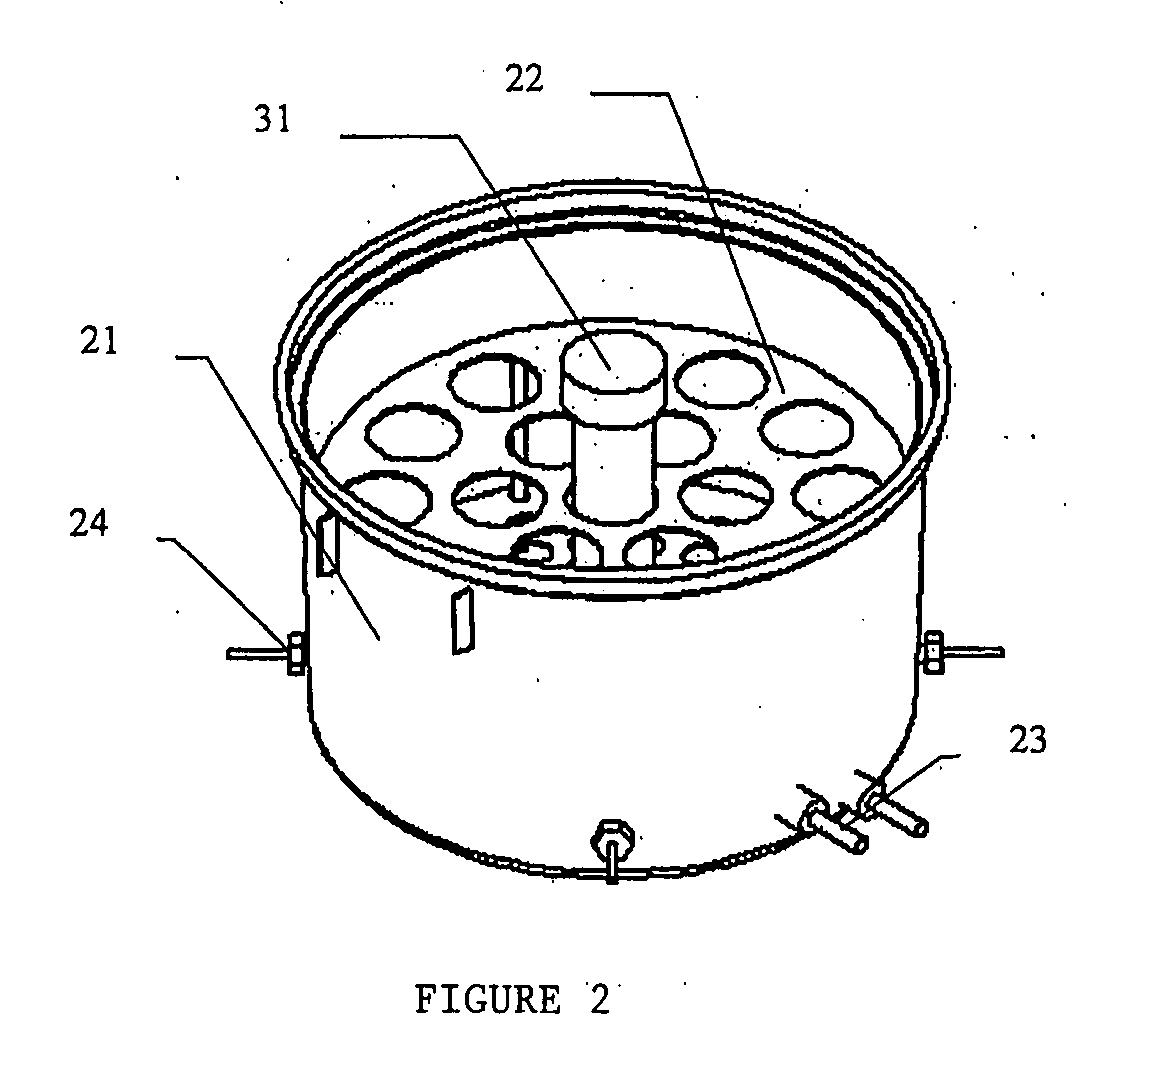 Sample Preparation Device for Extracting Drug Residue